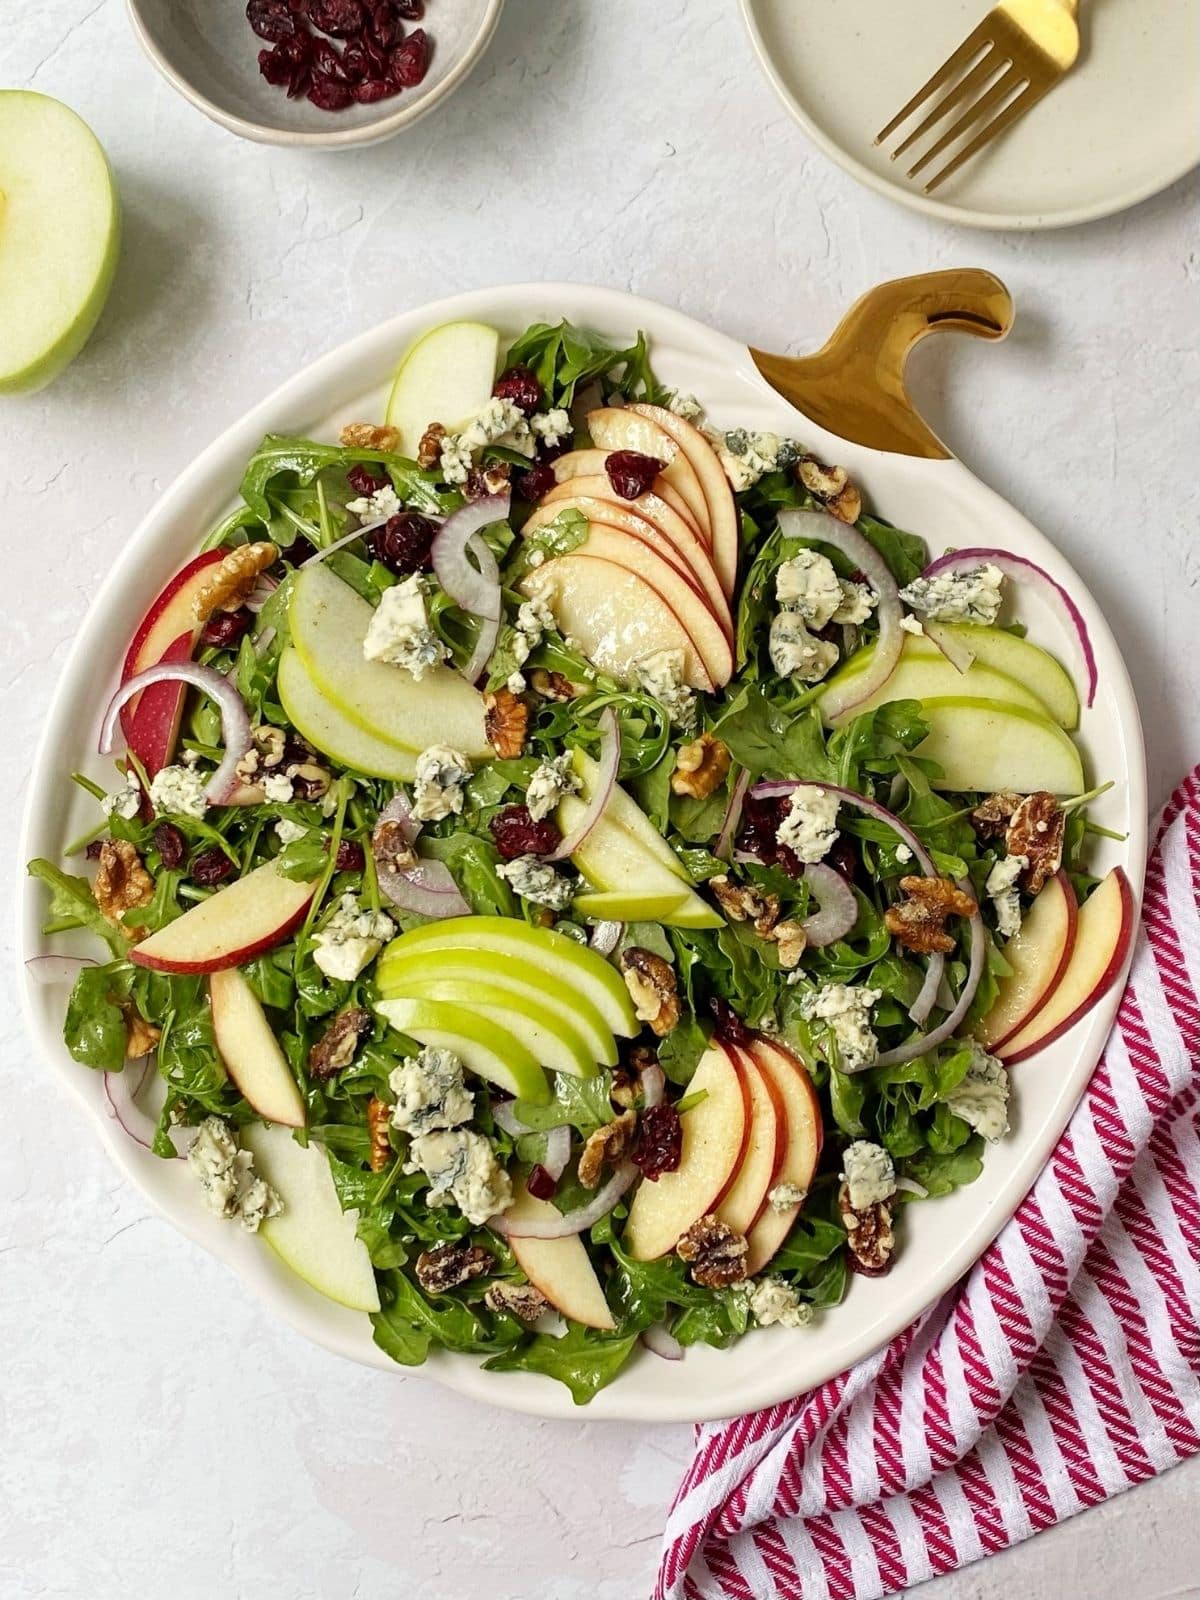 Blue Cheese Salad with Apples, Walnuts and Arugula